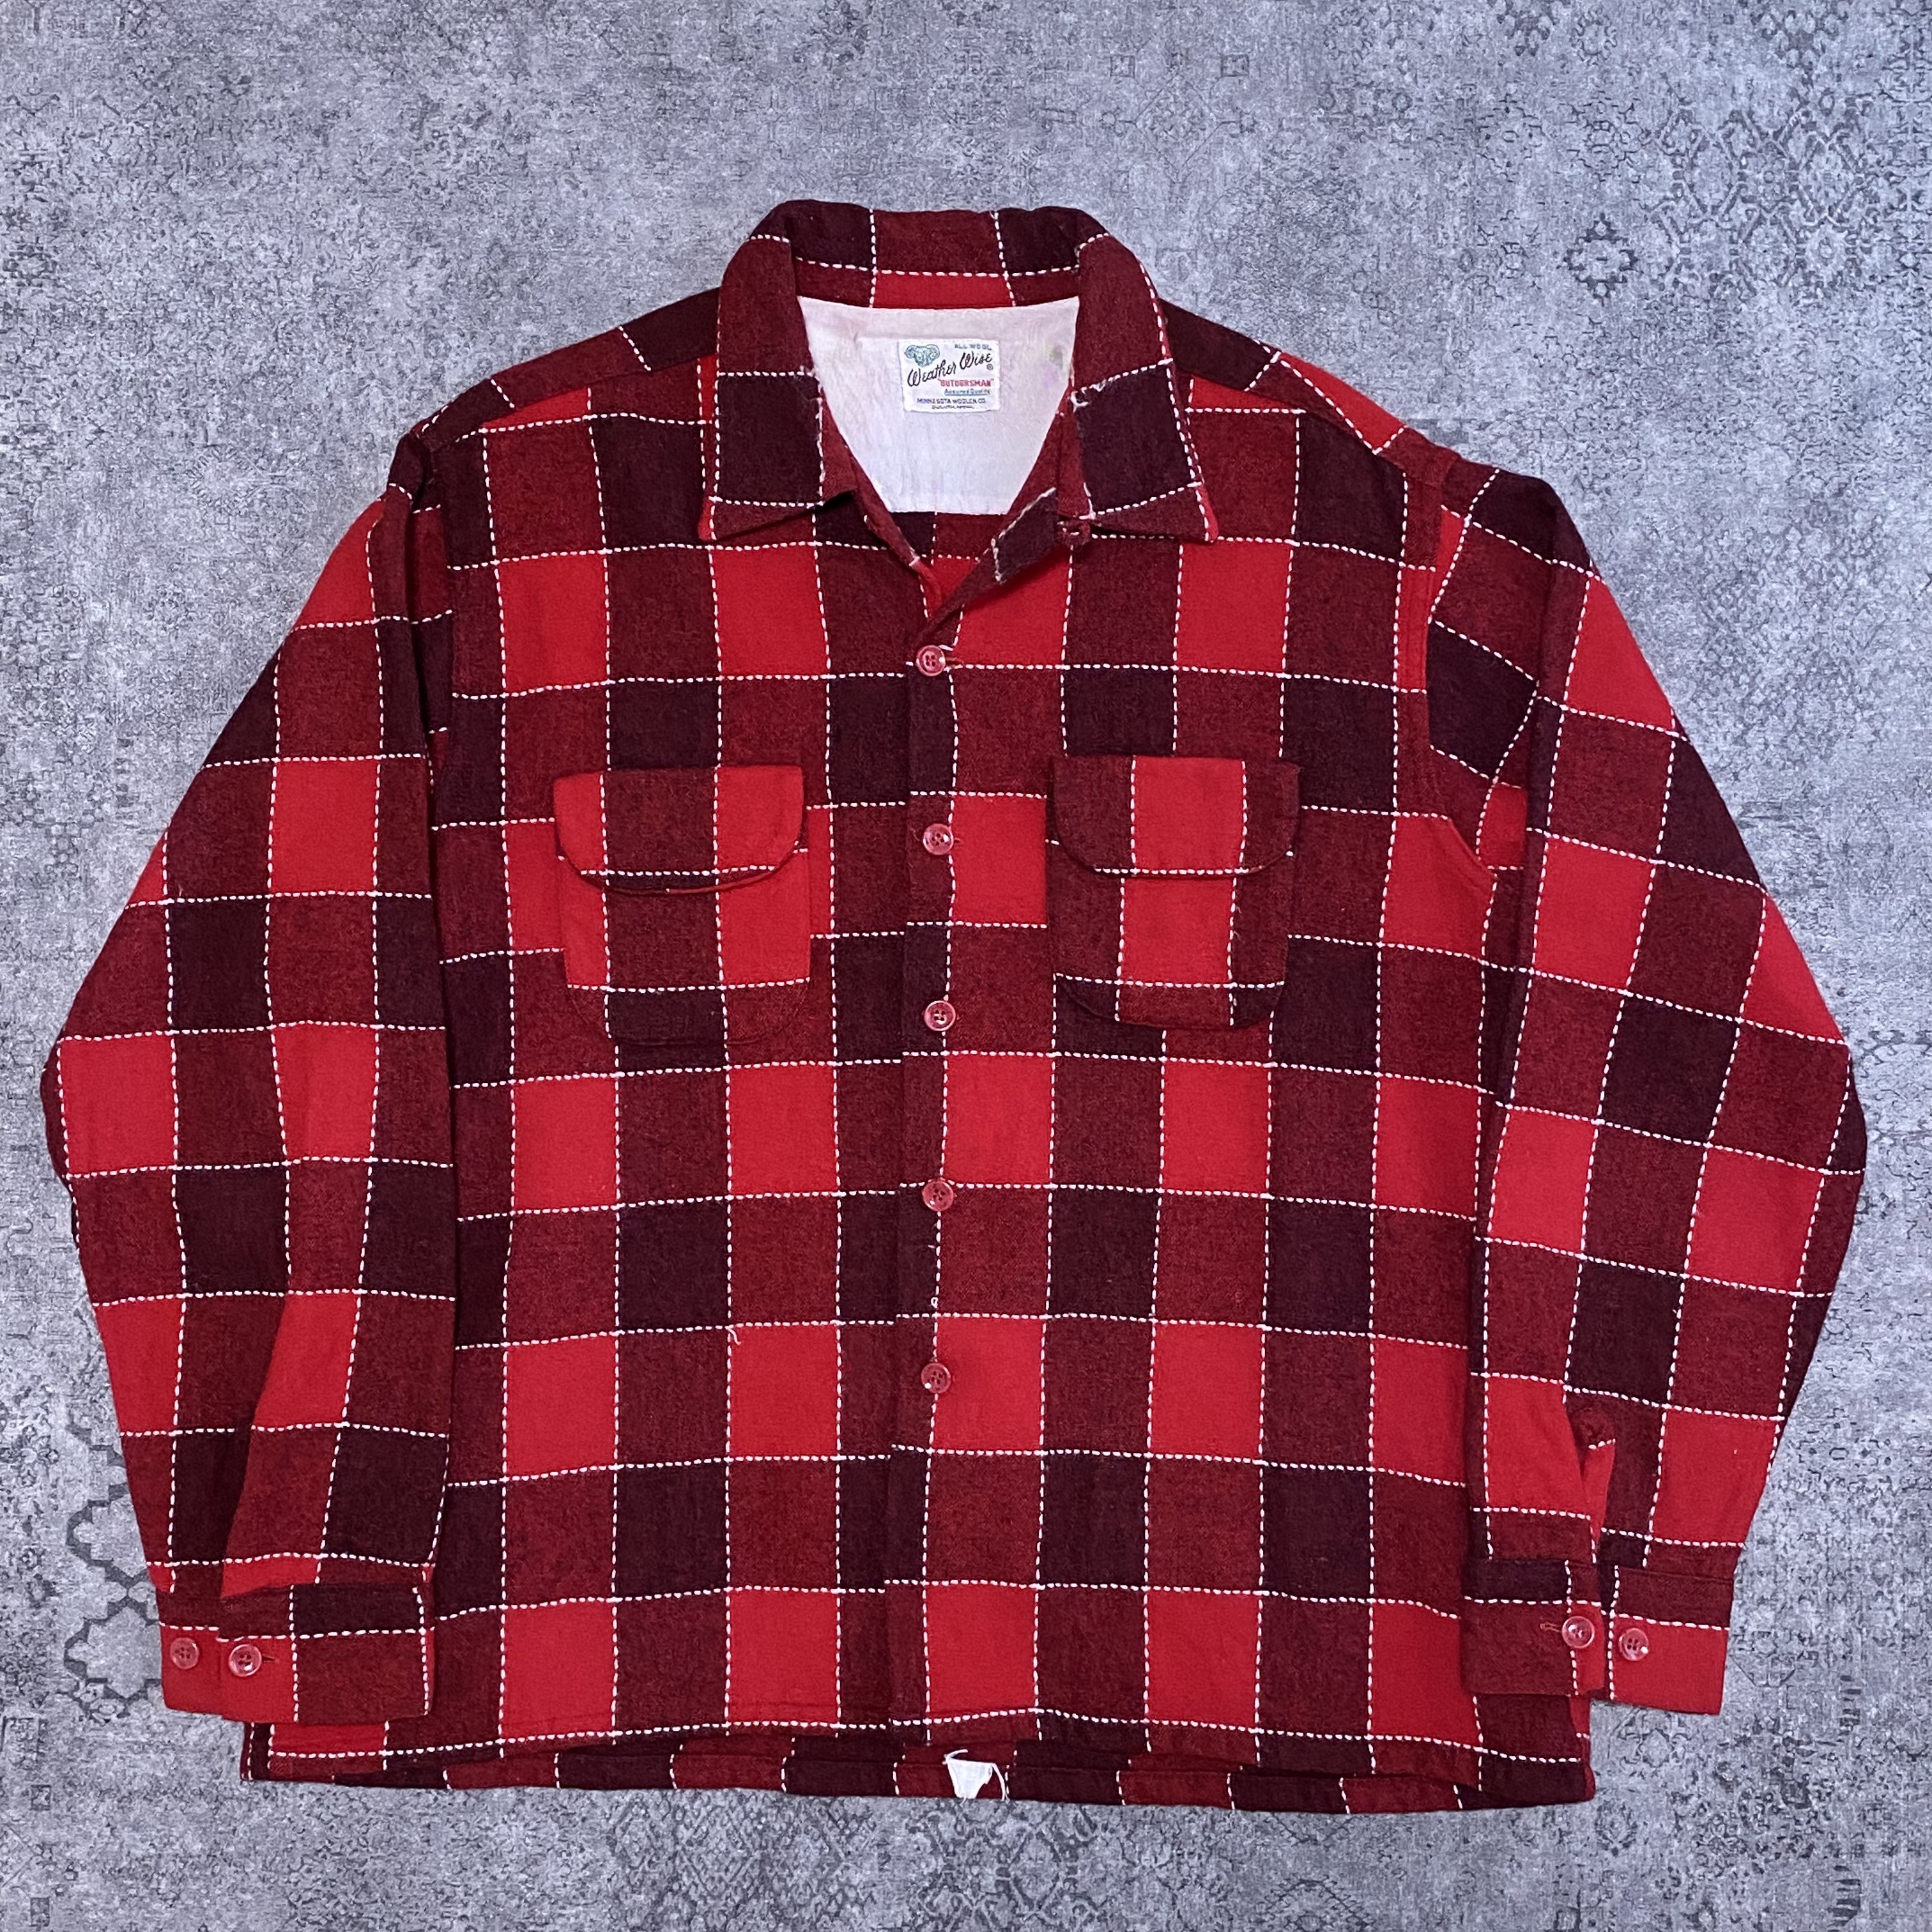 Vintage 1960s Weather Wise Wool Checkered Shirt チェーン